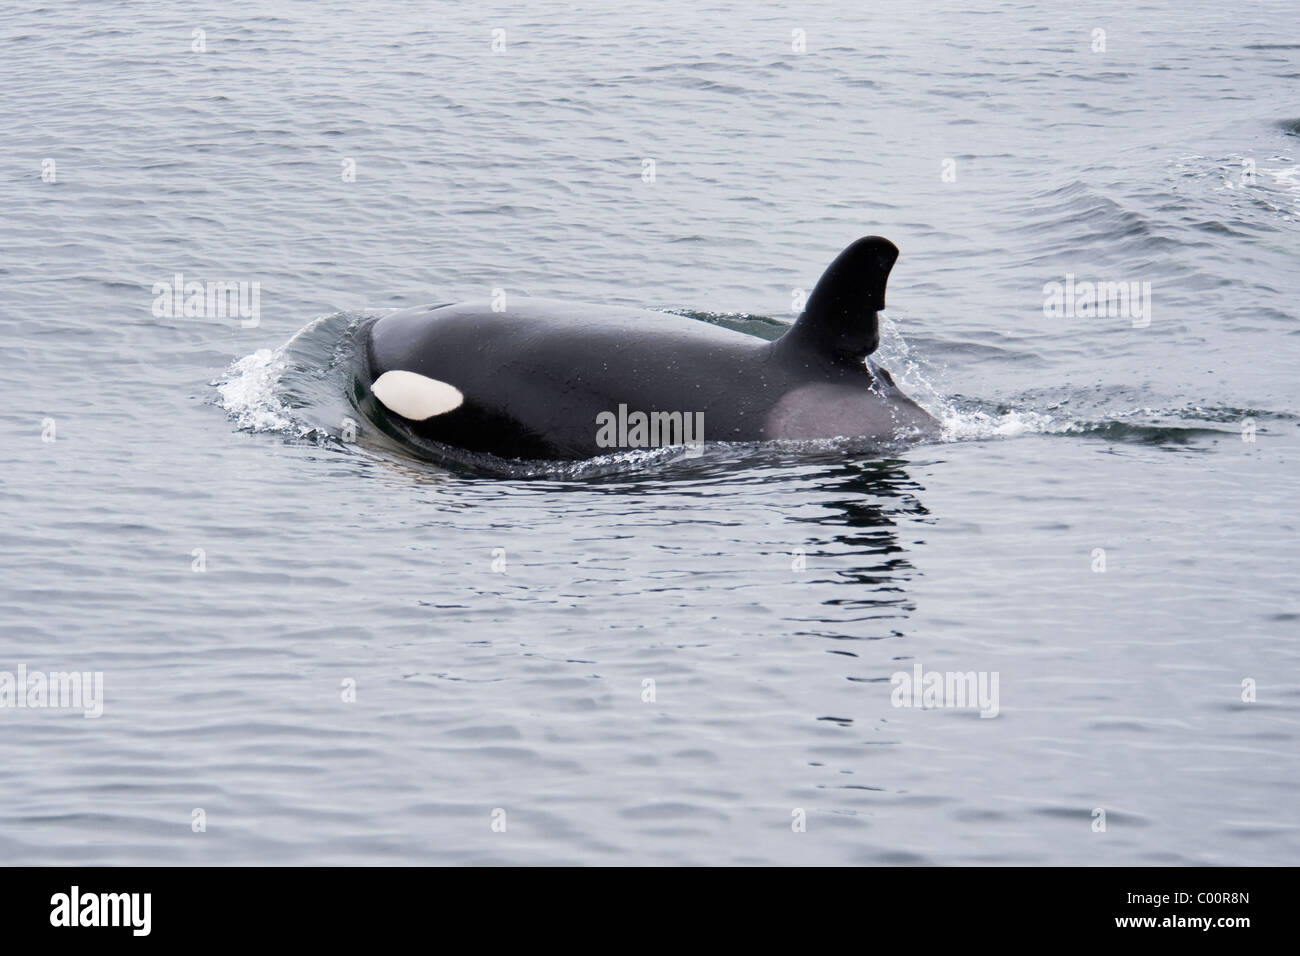 Killer Whale/Orca (Orcinus orca) probably sub-adult Male surfacing. Monterey, California, Pacific Ocean. Stock Photo